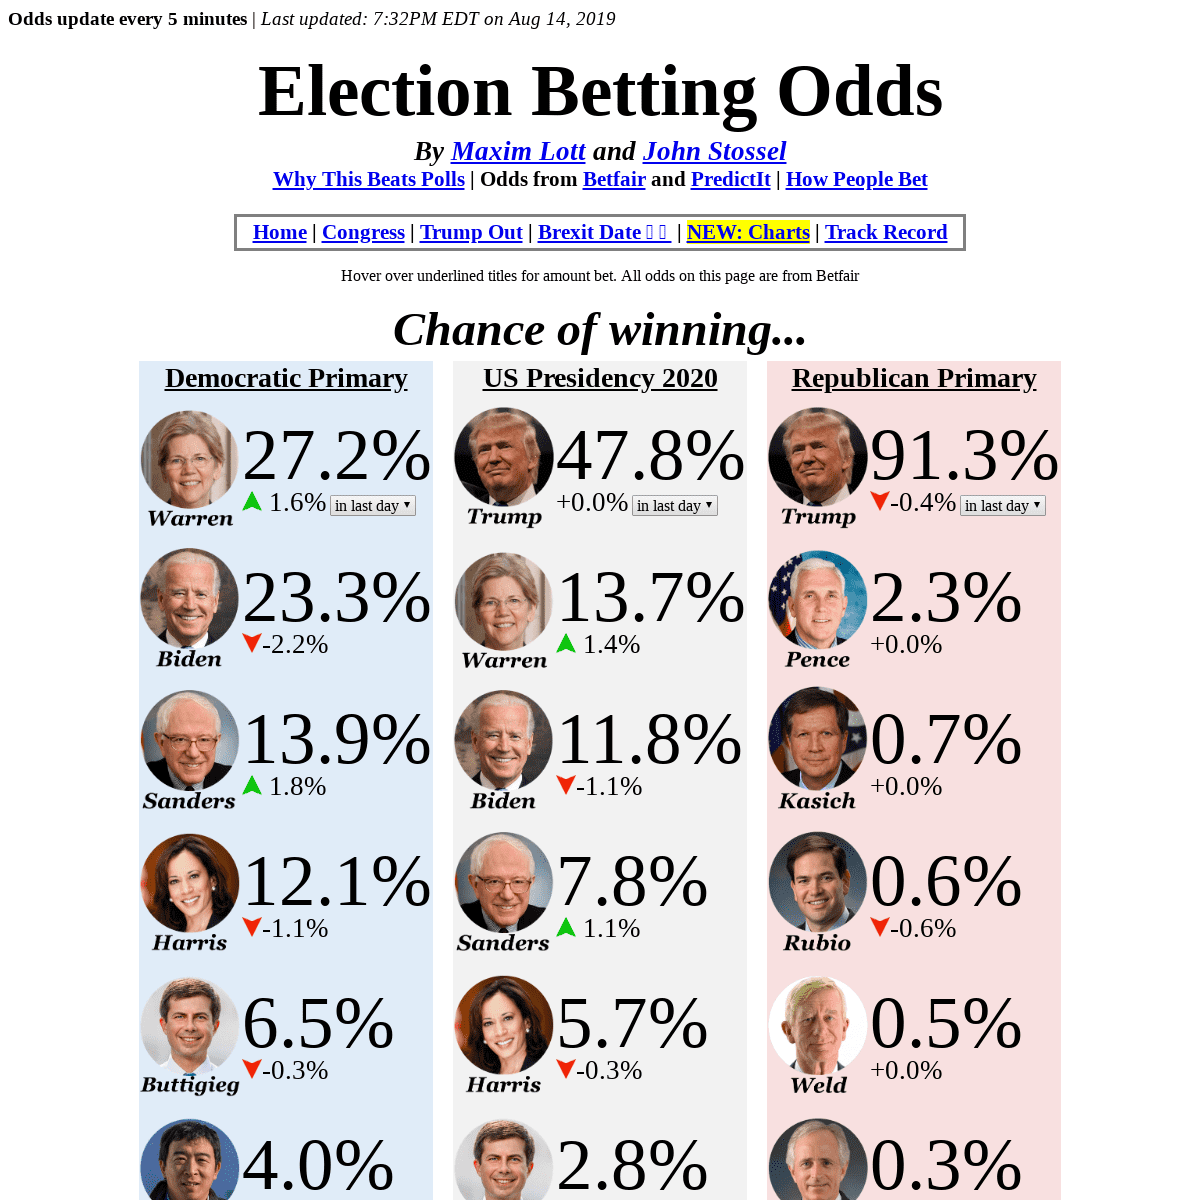 Election Betting Odds by Maxim Lott and John Stossel